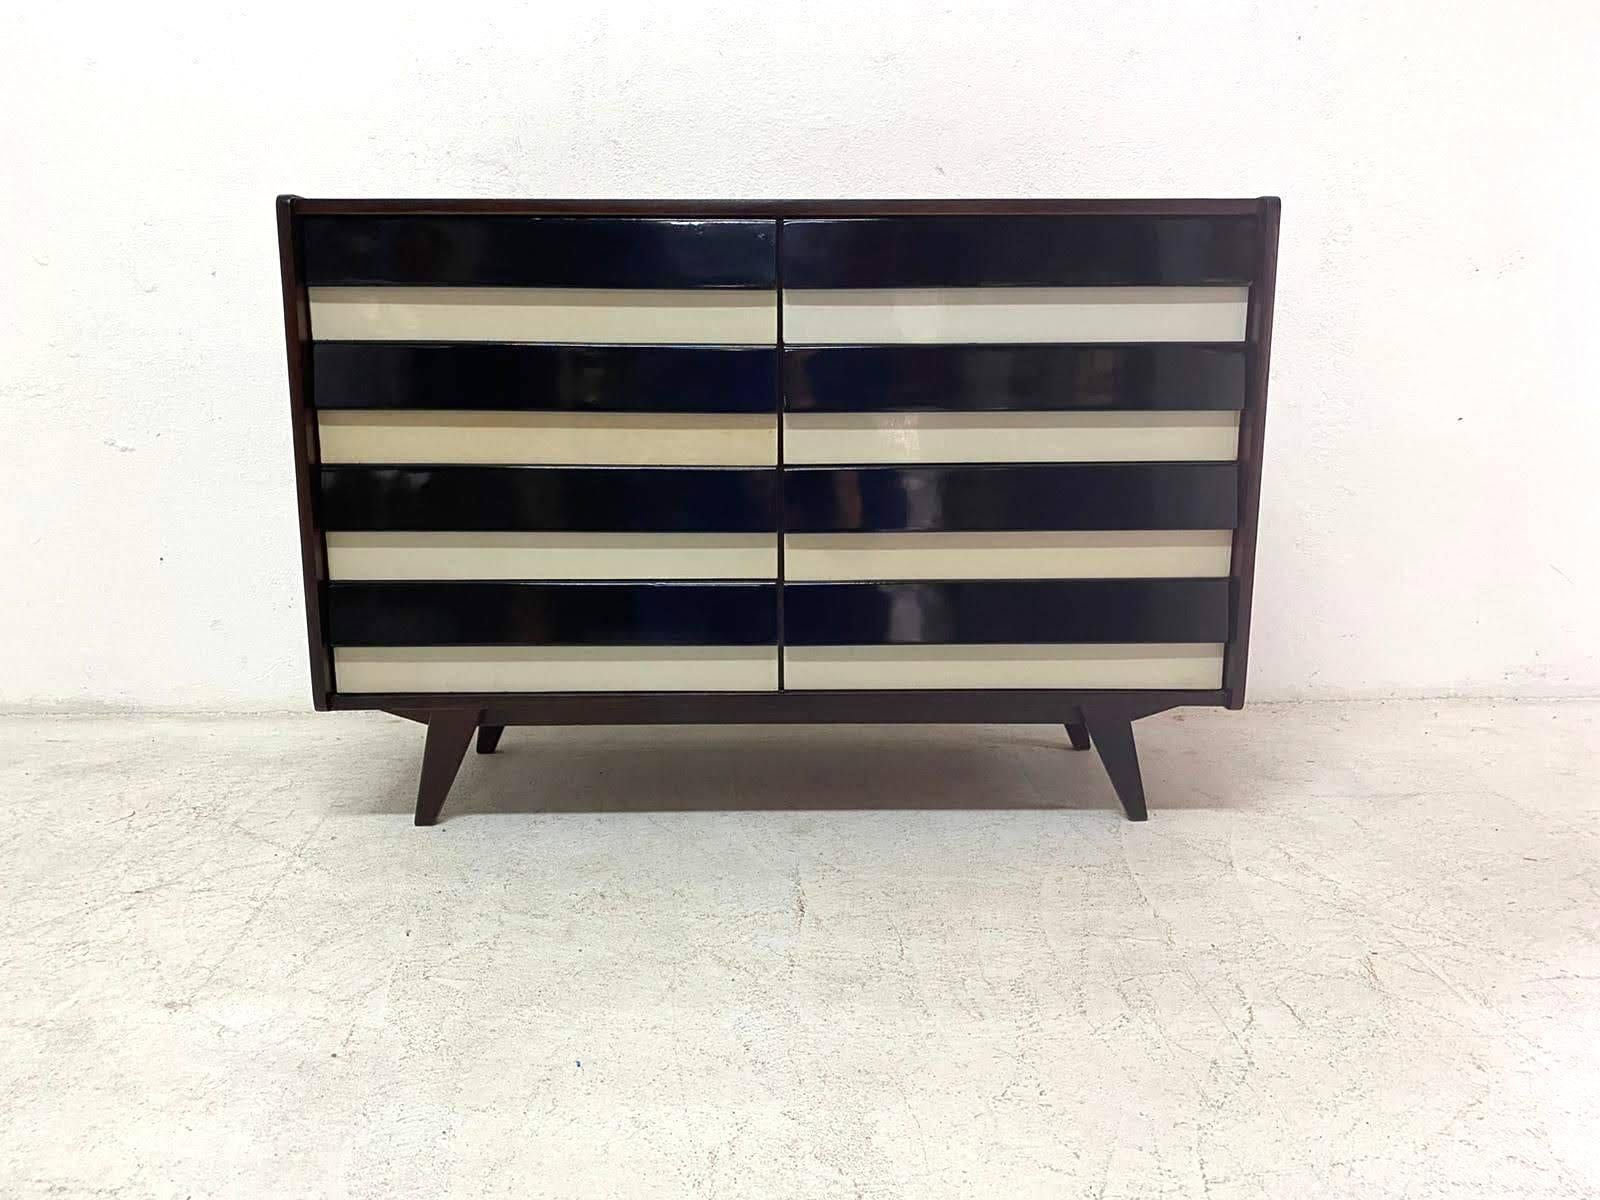 Modernist mahogany chest of drawers, model no. U-453, designed by Jirí Jiroutek for Interiér Praha. It was made in the former Czechoslovakia in the 1960s. This model is associated with the world-famous EXPO 58 in Brussels. It features dark stained